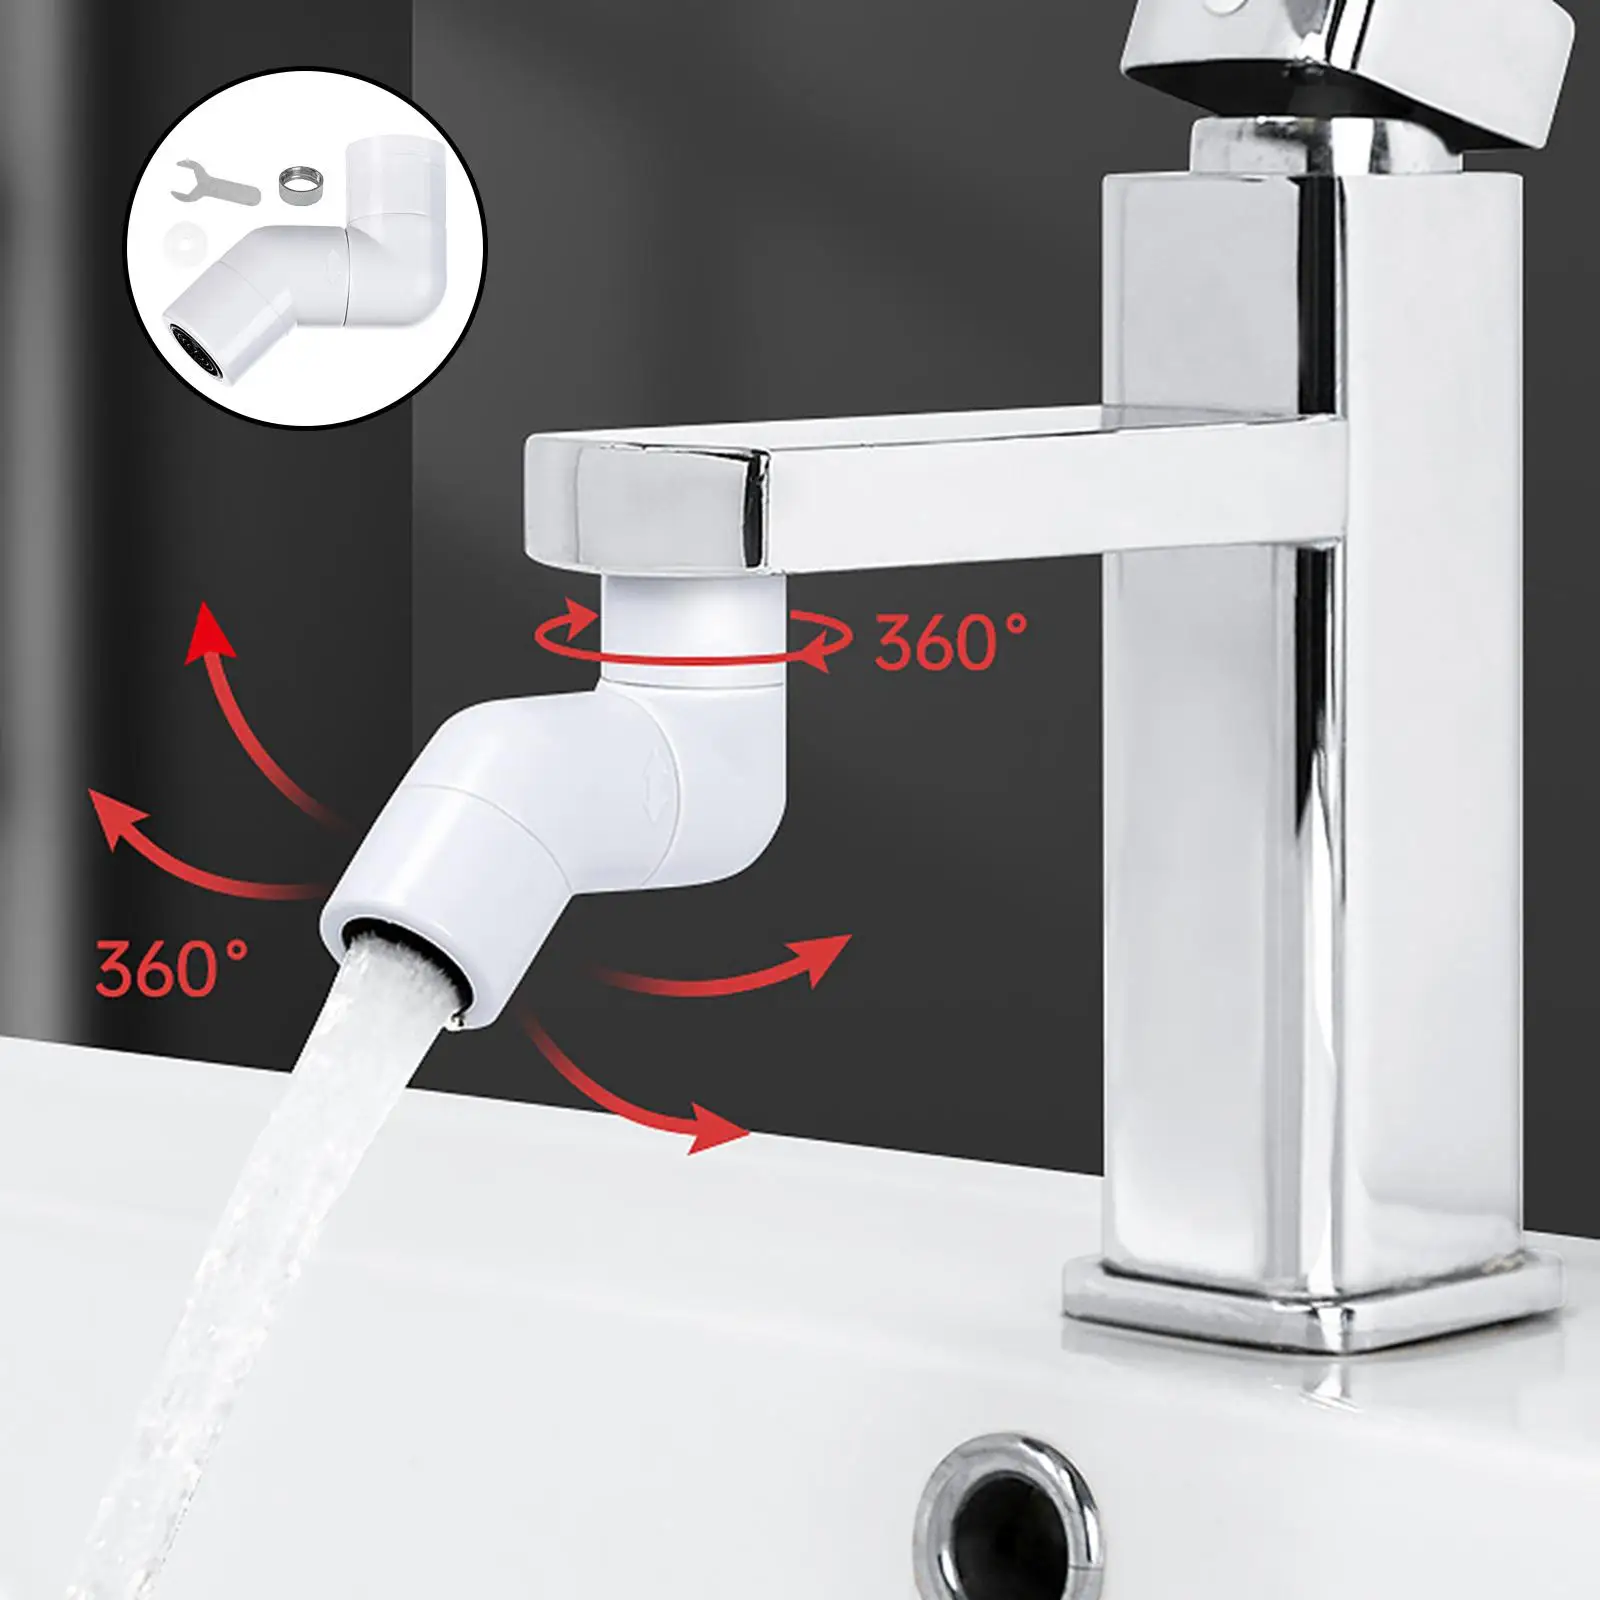 Universal 720 Degree Faucet Head Tap Aerator 720D Rotation Splashproof Swivel Water Saving Faucet For Bathroom Embout Robinet